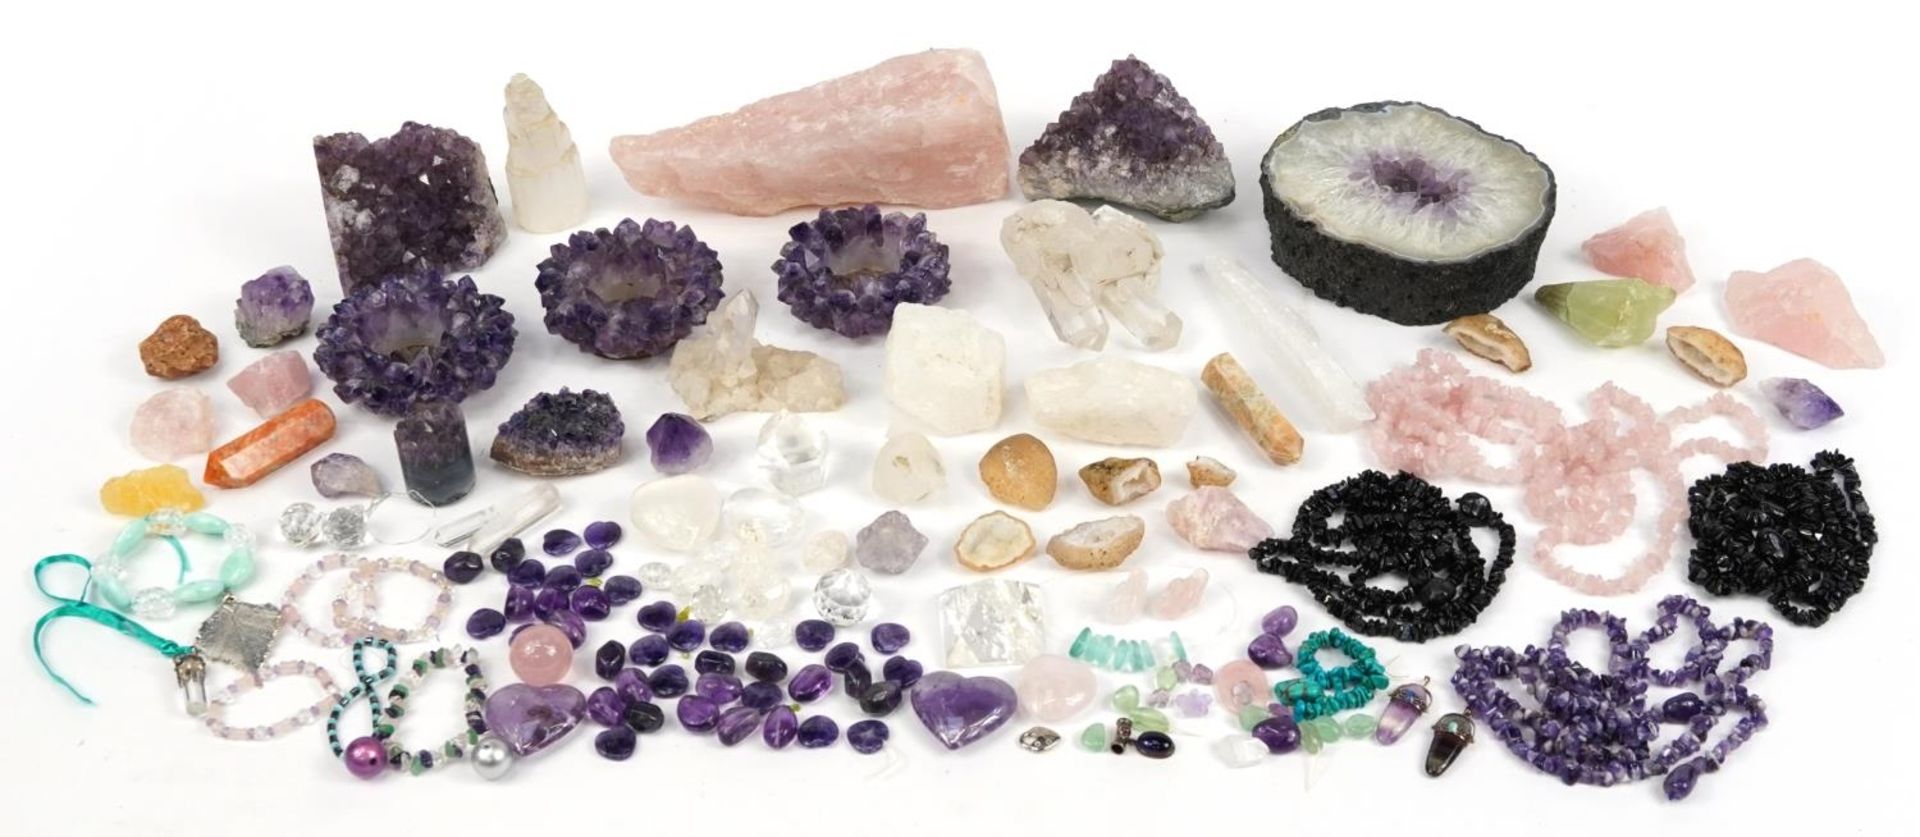 Collection of rock and mineral specimens including amethyst, rose quartz and rock crystal, the